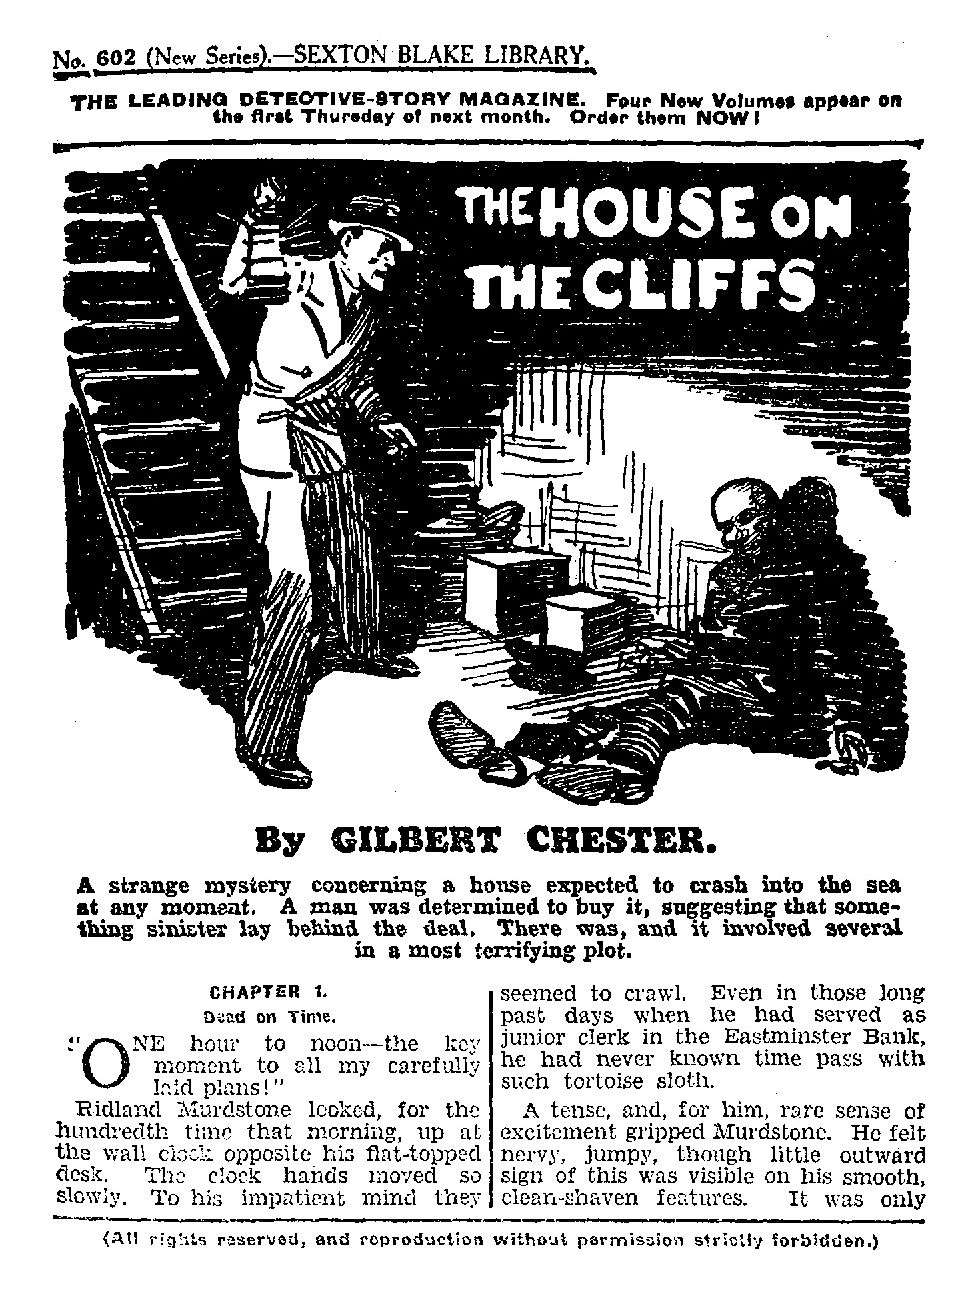 Book Cover For Sexton Blake Library S2 602 - The House On the Cliffs